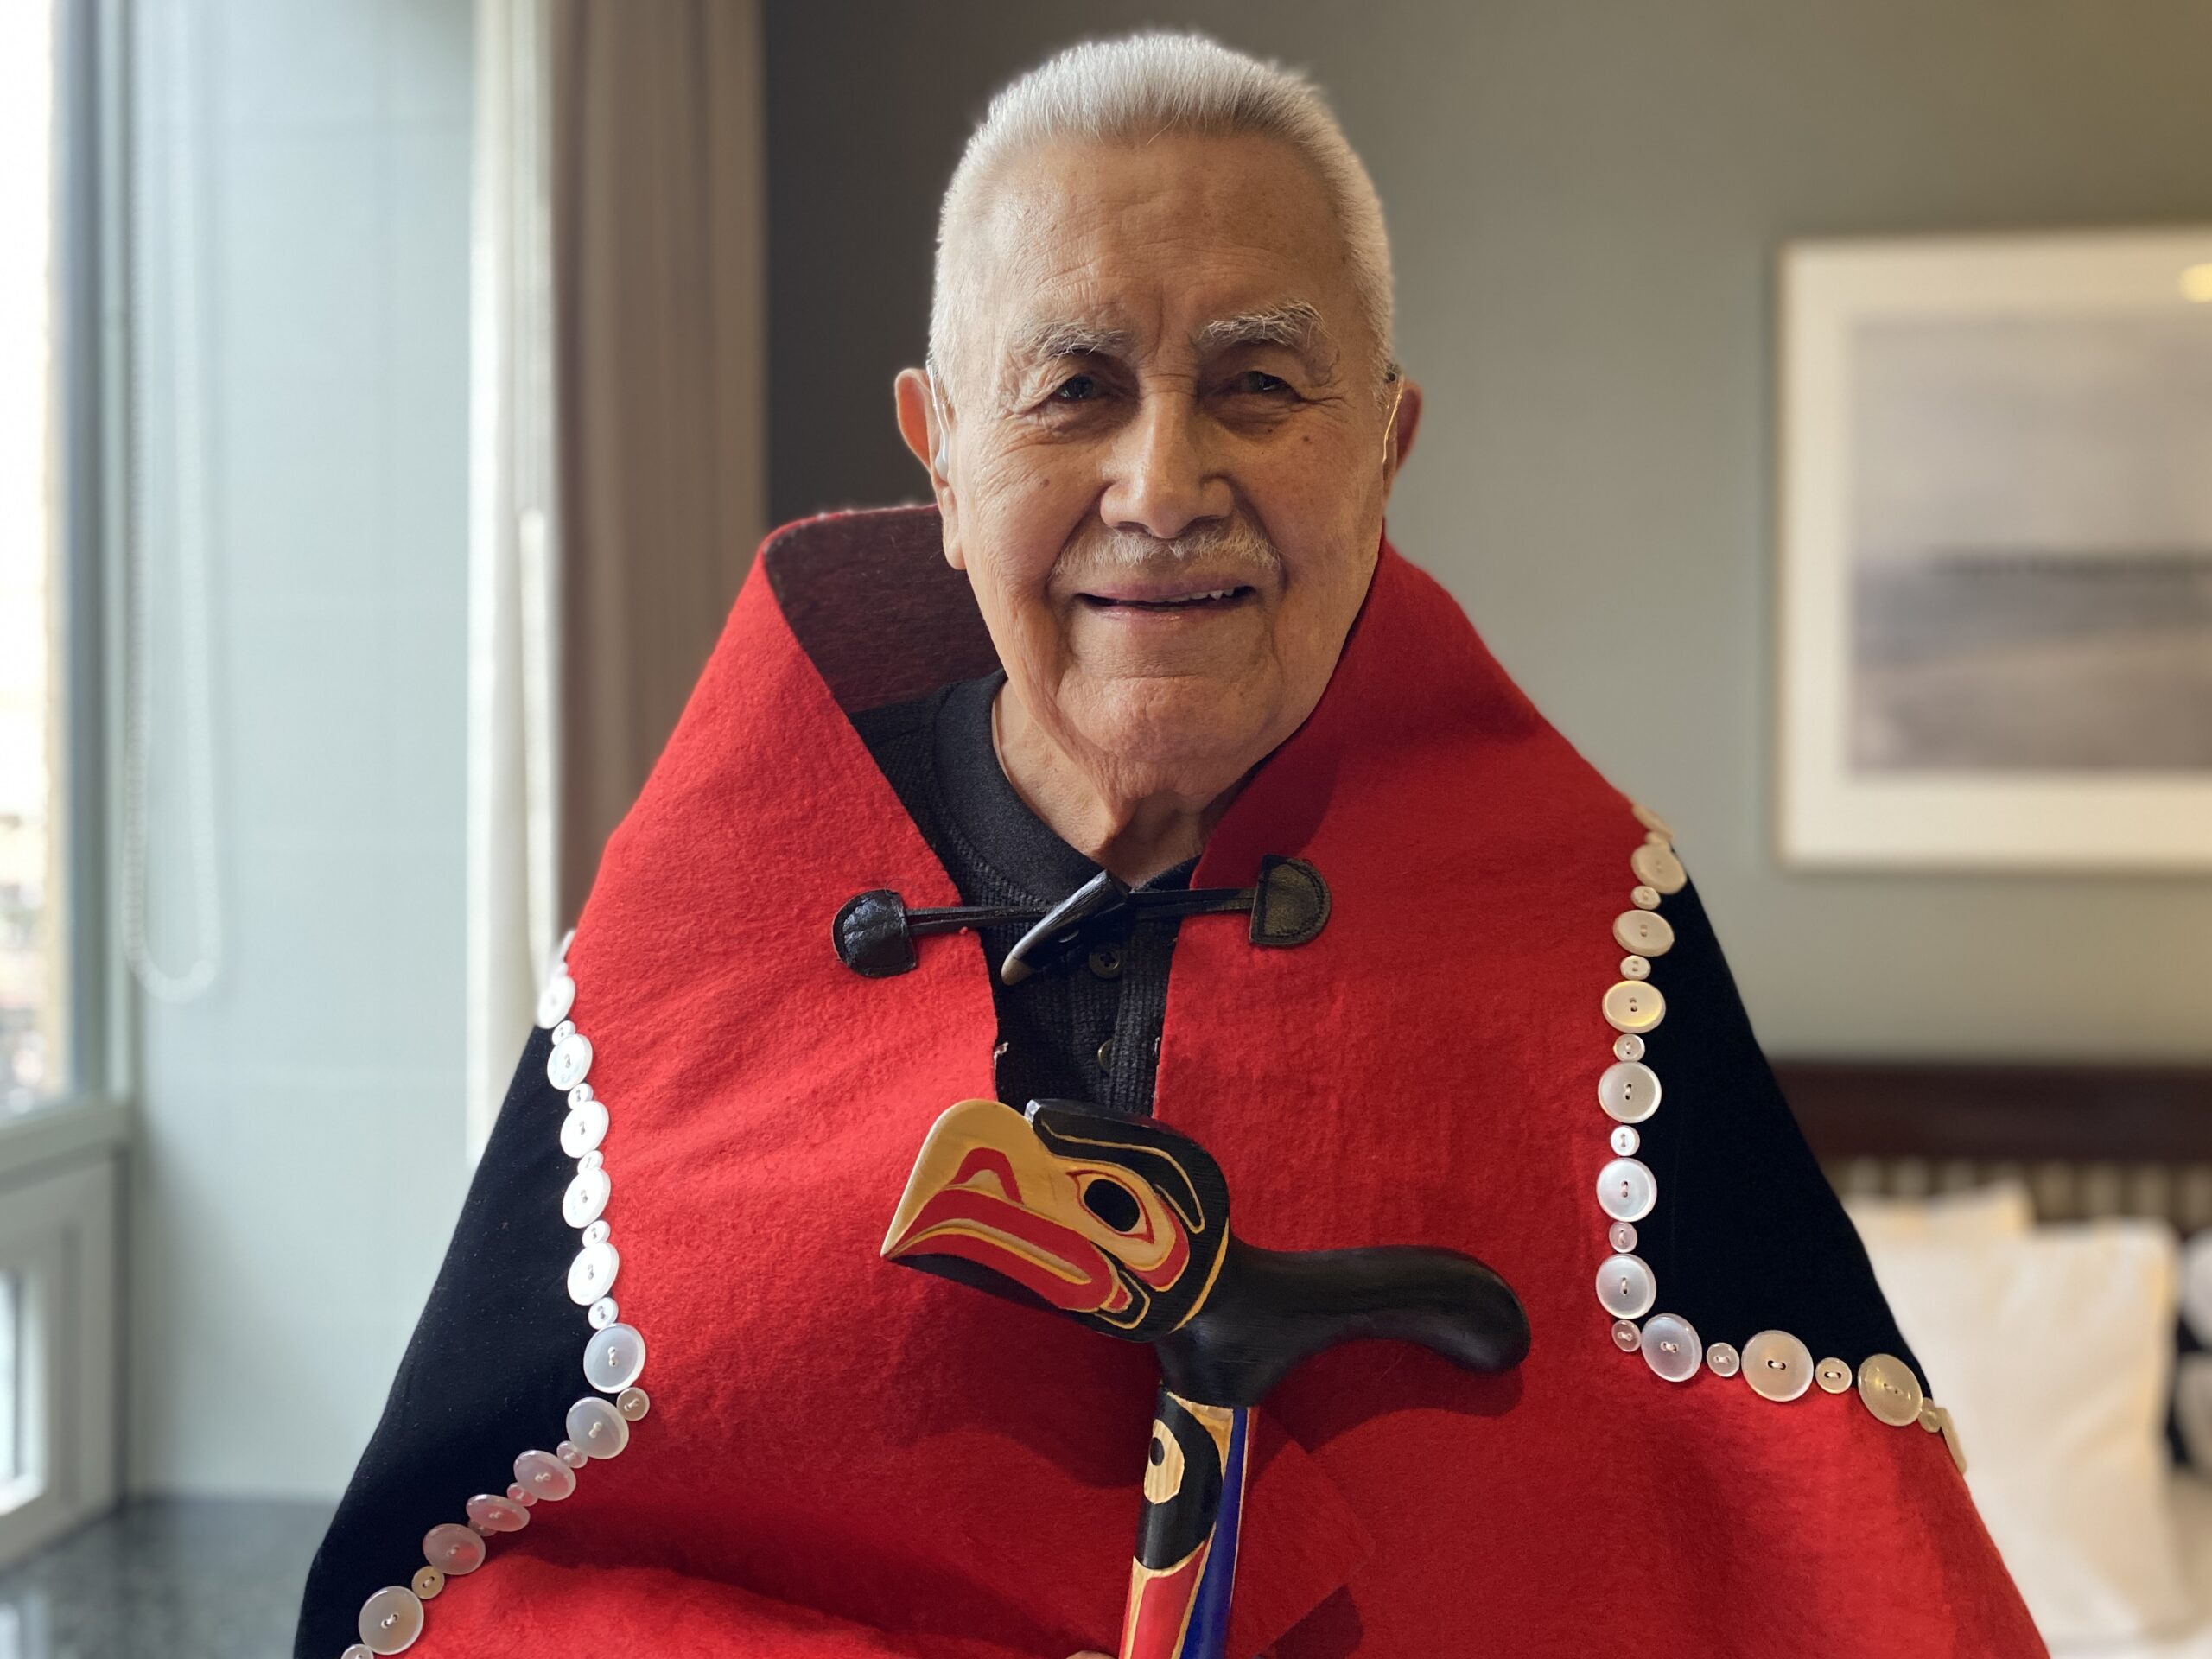 Gilaskamax Allan Brown, 86, at a hotel in Vancouver as part of the Gitxaala court hearings